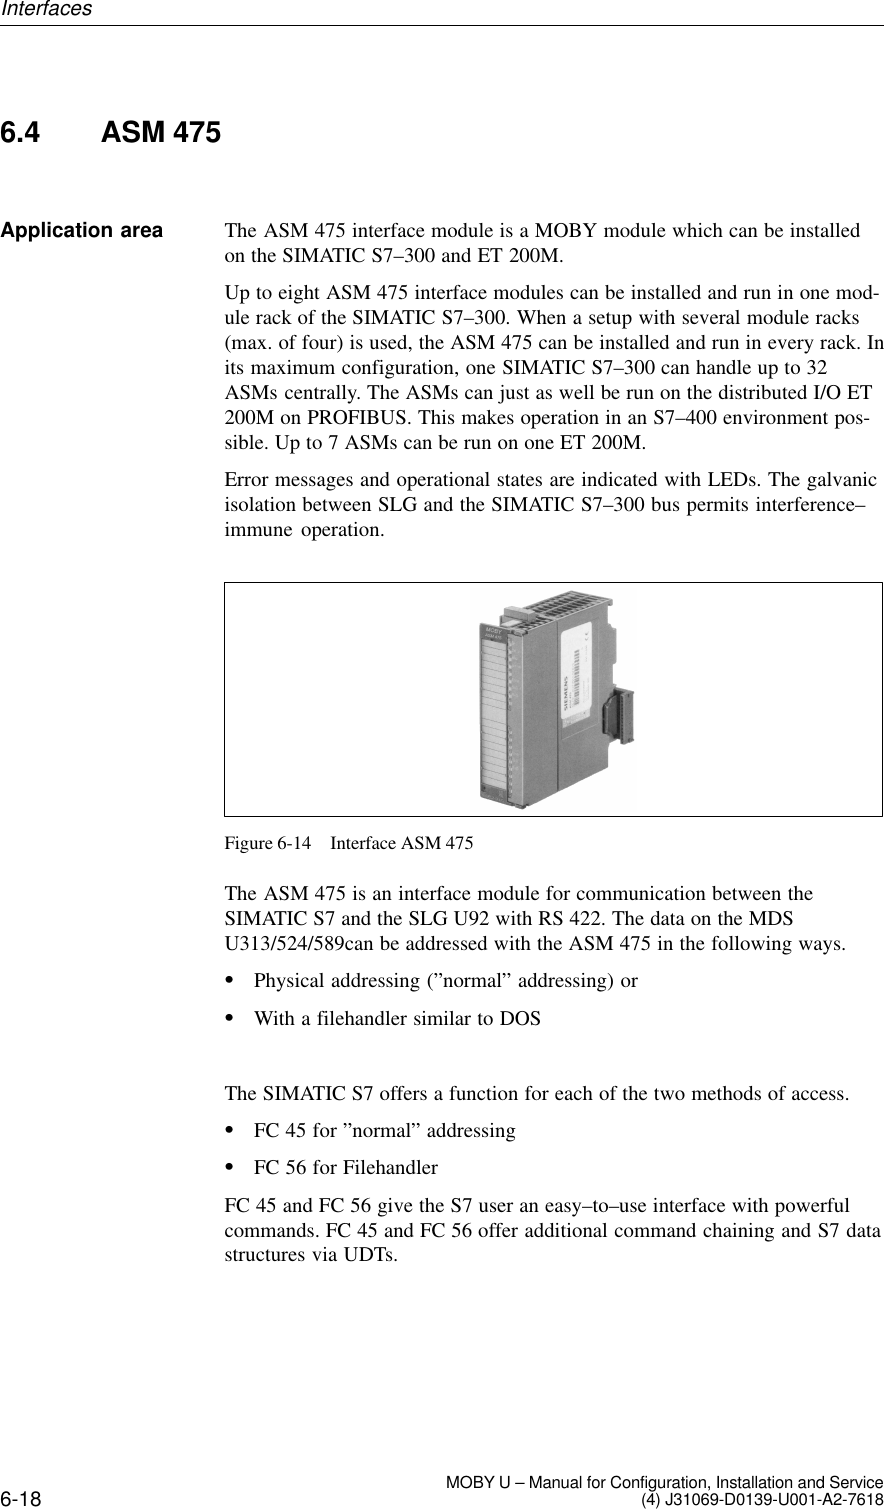 6-18 MOBY U – Manual for Configuration, Installation and Service(4) J31069-D0139-U001-A2-76186.4 ASM 475The ASM 475 interface module is a MOBY module which can be installedon the SIMATIC S7–300 and ET 200M.Up to eight ASM 475 interface modules can be installed and run in one mod-ule rack of the SIMATIC S7–300. When a setup with several module racks(max. of four) is used, the ASM 475 can be installed and run in every rack. Inits maximum configuration, one SIMATIC S7–300 can handle up to 32ASMs centrally. The ASMs can just as well be run on the distributed I/O ET200M on PROFIBUS. This makes operation in an S7–400 environment pos-sible. Up to 7 ASMs can be run on one ET 200M.Error messages and operational states are indicated with LEDs. The galvanicisolation between SLG and the SIMATIC S7–300 bus permits interference–immune operation.Figure 6-14 Interface ASM 475The ASM 475 is an interface module for communication between the SIMATIC S7 and the SLG U92 with RS 422. The data on the MDSU313/524/589can be addressed with the ASM 475 in the following ways.Physical addressing (”normal” addressing) orWith a filehandler similar to DOSThe SIMATIC S7 offers a function for each of the two methods of access.FC 45 for ”normal” addressingFC 56 for FilehandlerFC 45 and FC 56 give the S7 user an easy–to–use interface with powerfulcommands. FC 45 and FC 56 offer additional command chaining and S7 datastructures via UDTs.Application areaInterfaces